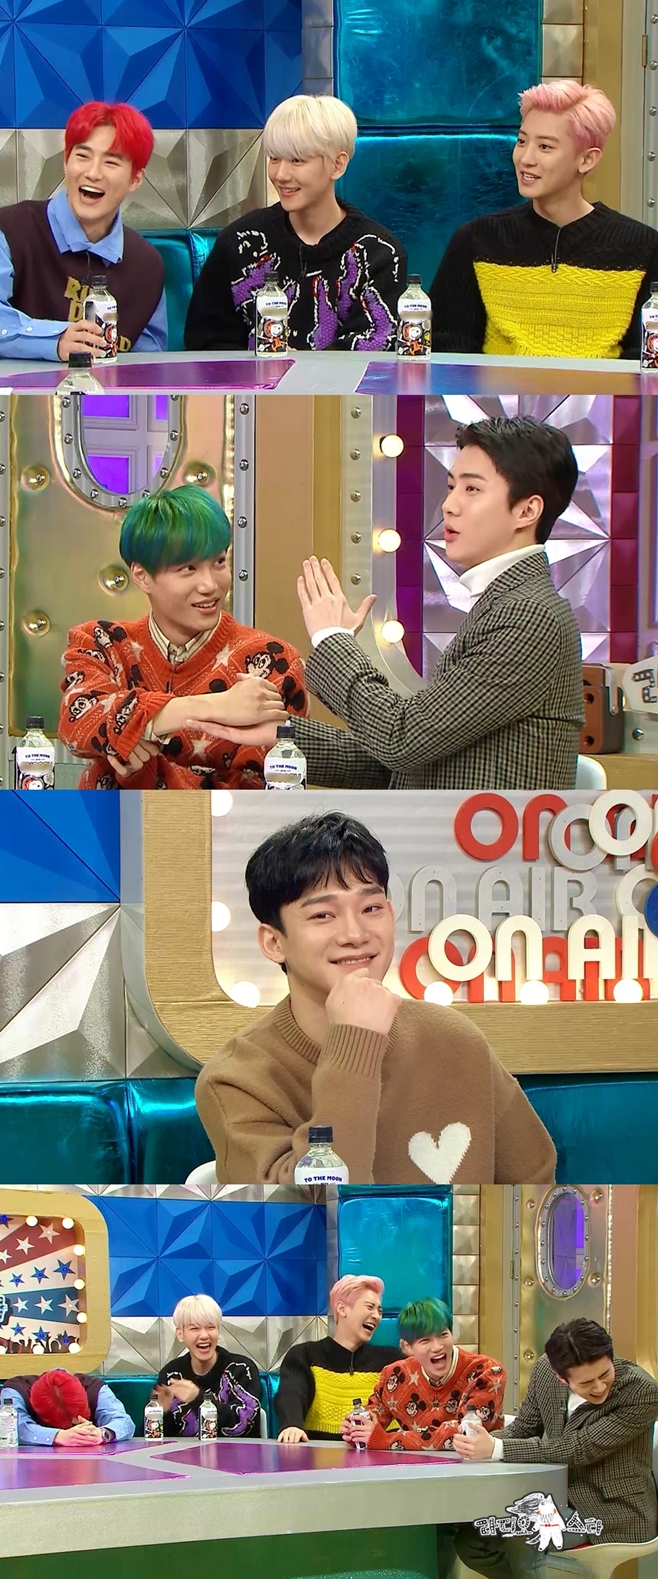 The group EXO (EXO) scrambles to 6 persons complete body in Radio Star.The MBC entertainment program Radio Star, which will be broadcast on the 4th, will be featured in EXO Radio Star featuring EXO (Suho, Baekhyun, Chanyeol, Kai, Sehun, and Chen).EXO, who returned to her regular 6th album OBSESSION on the 27th of last month, chose Radio Star as a comeback entertainment, especially this time, she announced the news of her appearance with a full six.As all members except Chen are the first appearances of Radio Star, there is a growing interest in what stories they will solve.In the recent recording, EXO members laughed at the appearance of raising the leader Suho Mole throughout the broadcast.It is the back door that members except Suho and MC showed the best unity.In addition, EXO added fun with the unexpected Battle of the Great. Those who had been in their eighth year of activity often said We are in our time and caused a laugh.Among them, it is known that there are people who have gathered their mouths and pointed out them as they are.In addition, they are known to have solved the JinSoul talk without hesitation, and it is expected to stimulate curiosity.It is the back door that he expressed his gratitude to each other by revealing the difficult times and focused everyones attention by frankly mentioning the issue of EXOs renewal.EXOs complete performance ceremony can be confirmed through Radio Star which is broadcasted at 11:05 pm on the 4th.